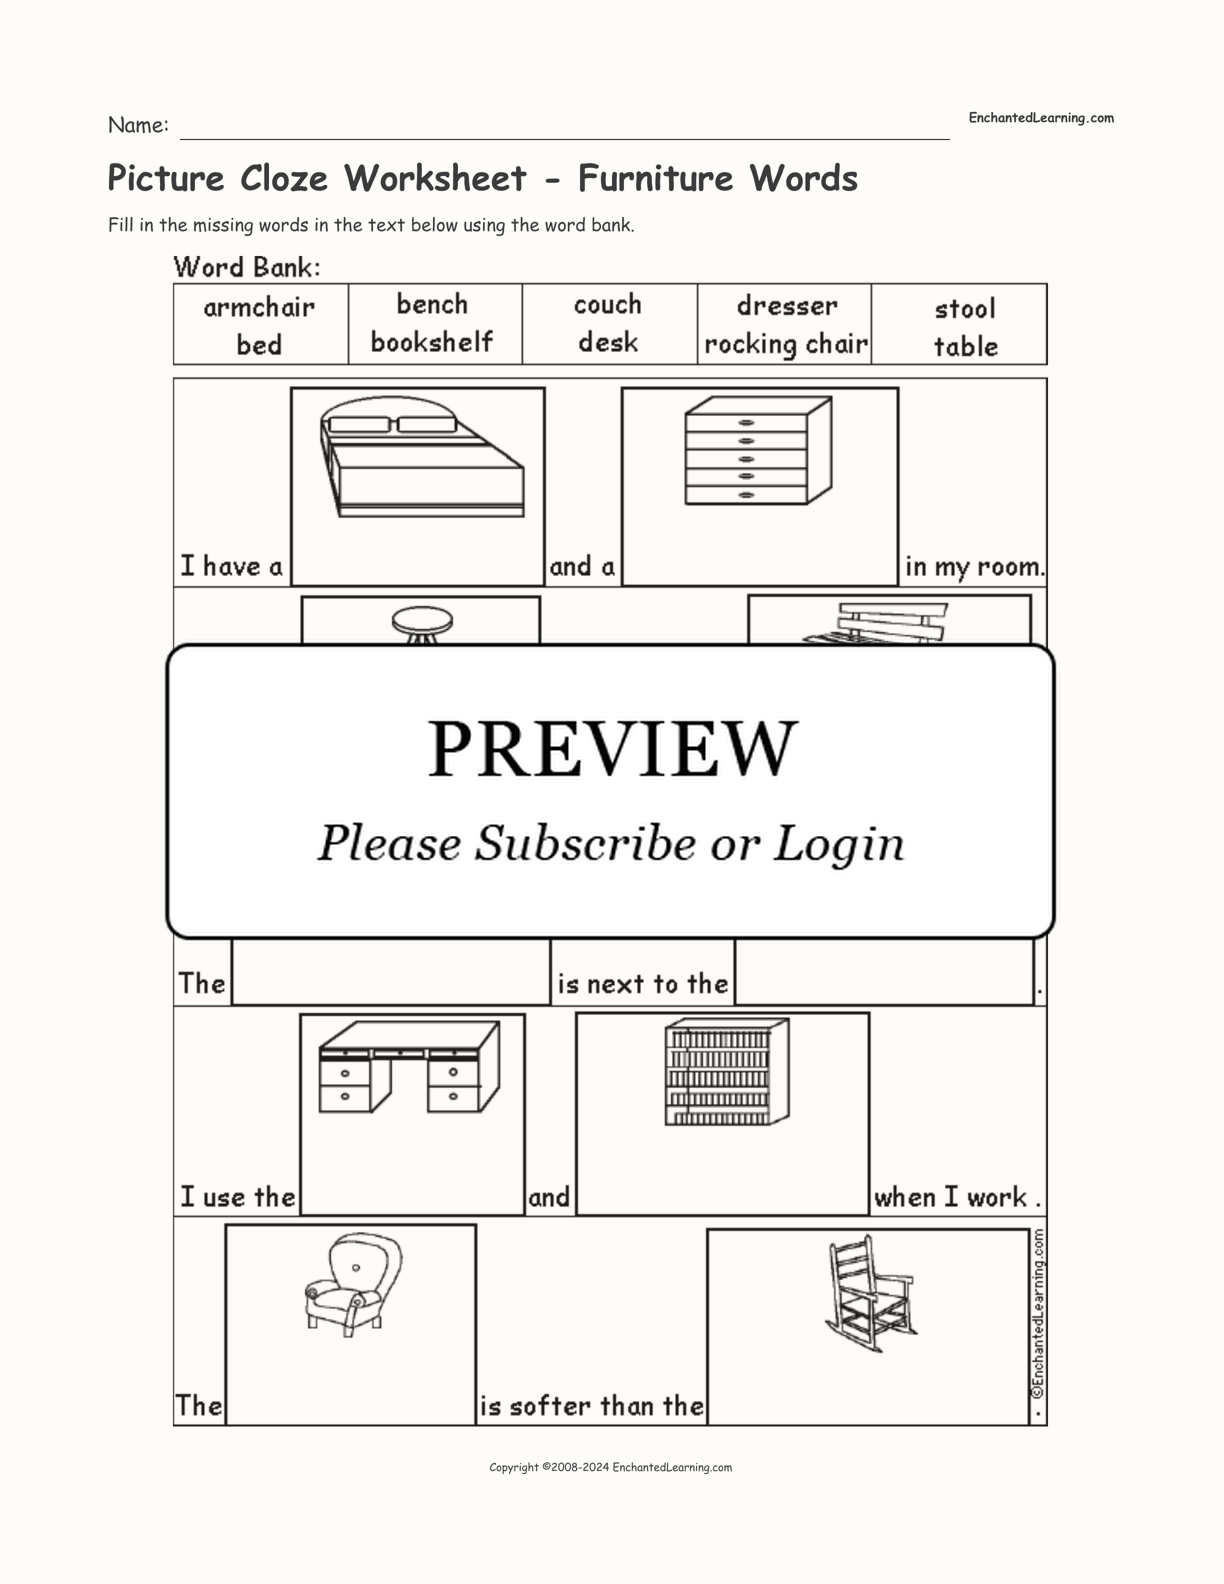 Picture Cloze Worksheet - Furniture Words interactive worksheet page 1